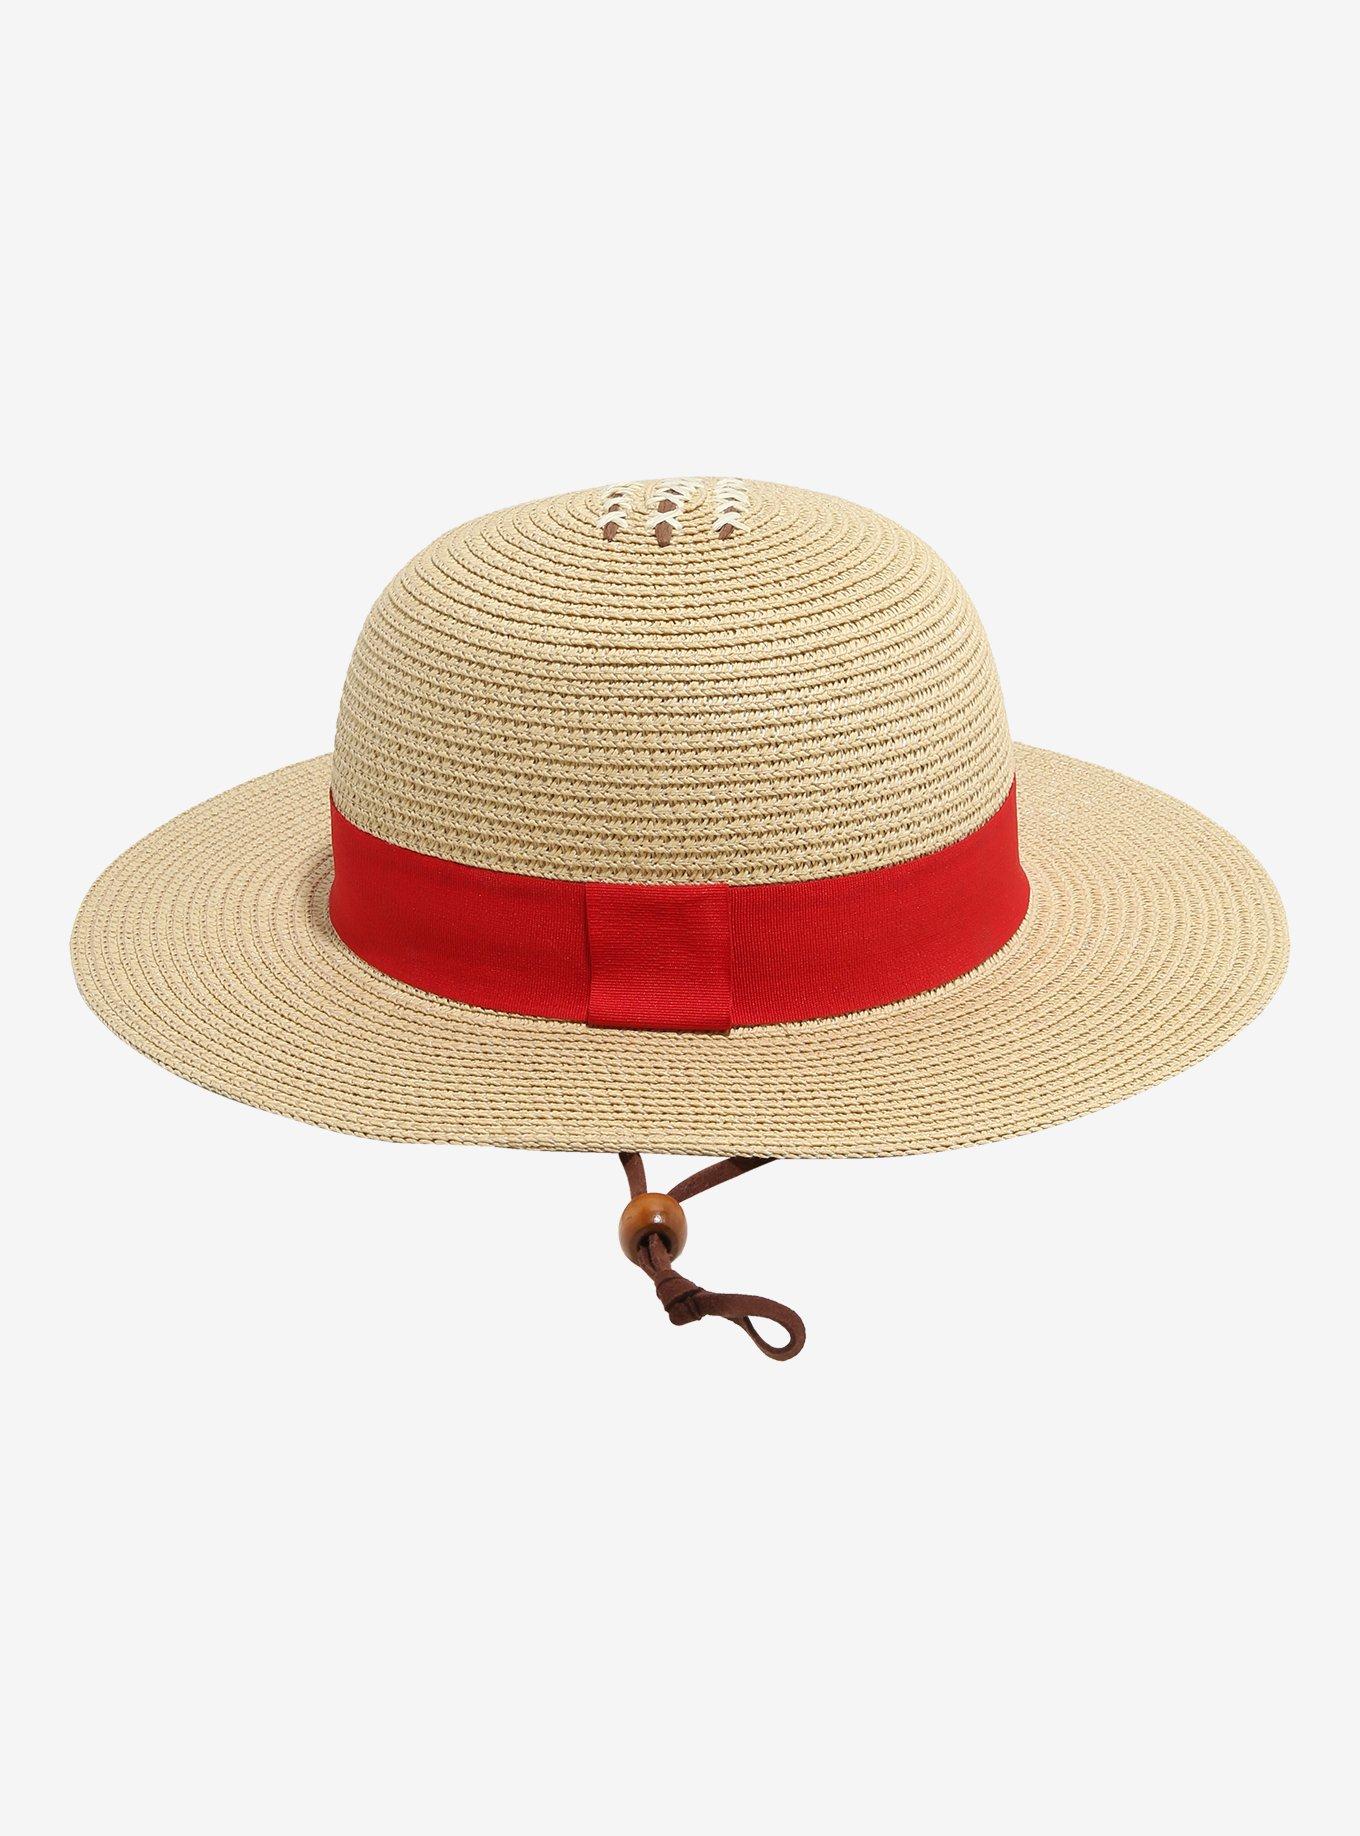 One Piece Monkey D. Luffy Replica Straw Hat — BoxLunch Exclusive, , hi-res